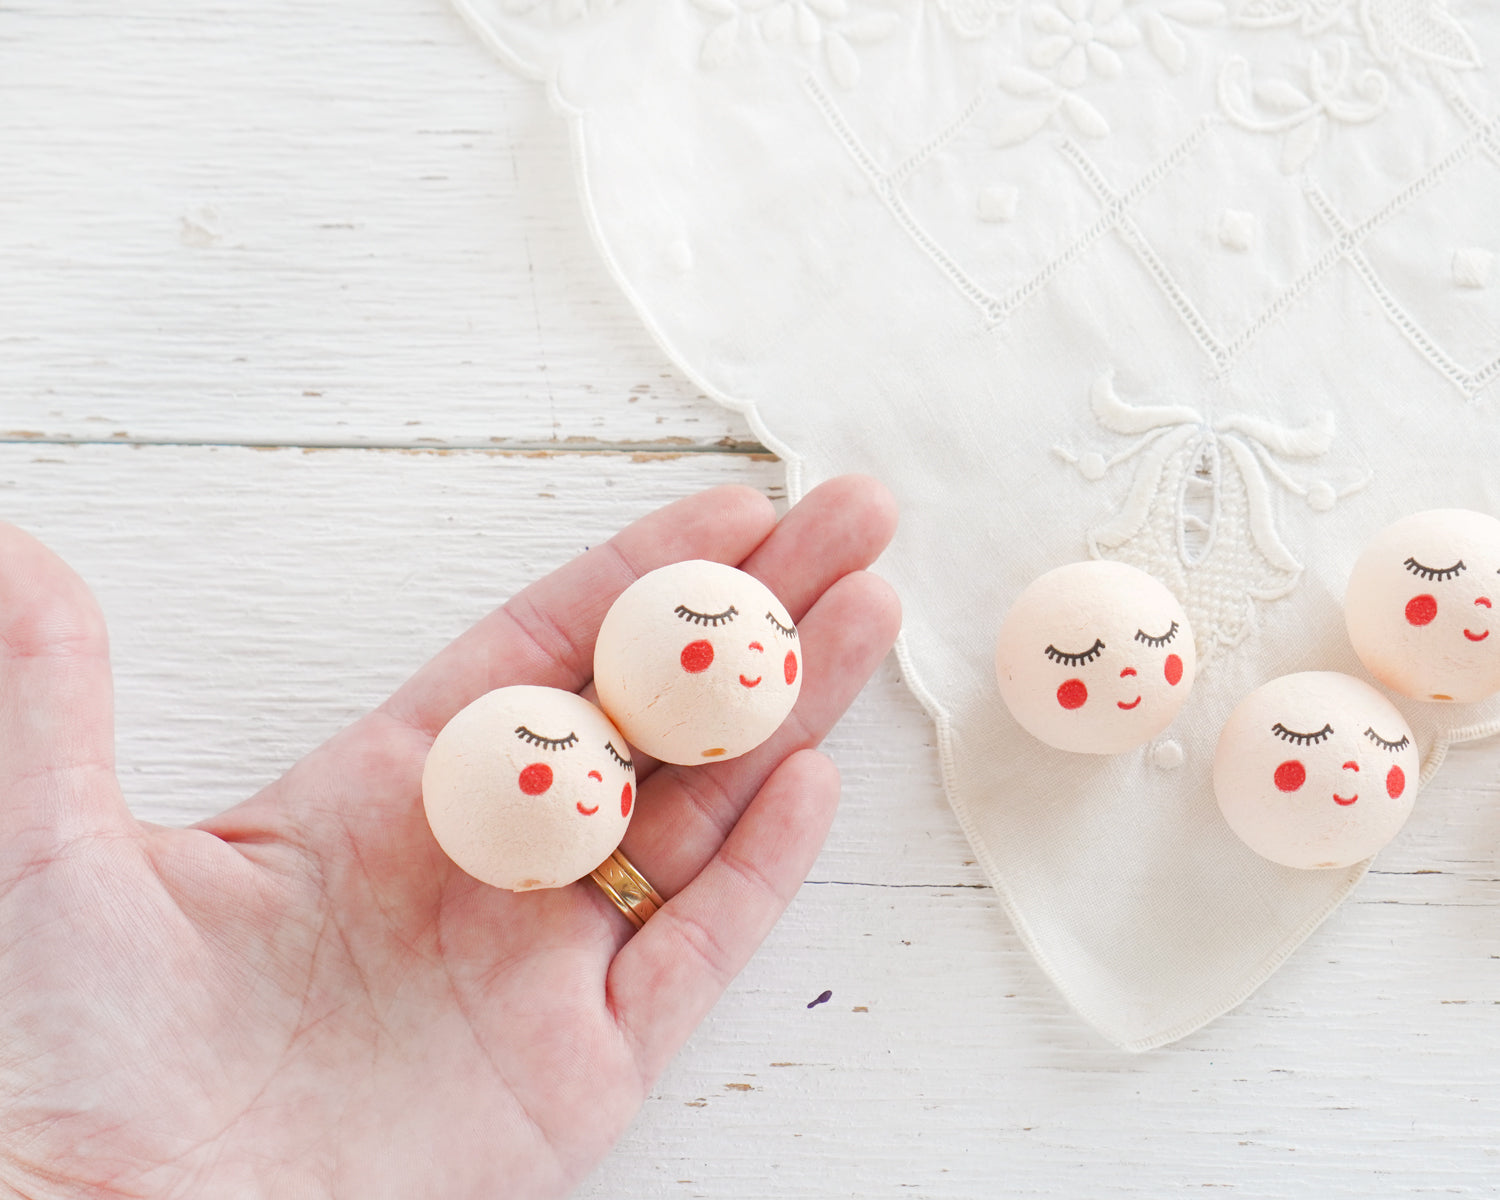 Cream Spun Cotton Heads: SWEET ANGEL - Vintage-Style Cotton Angel Heads with Faces